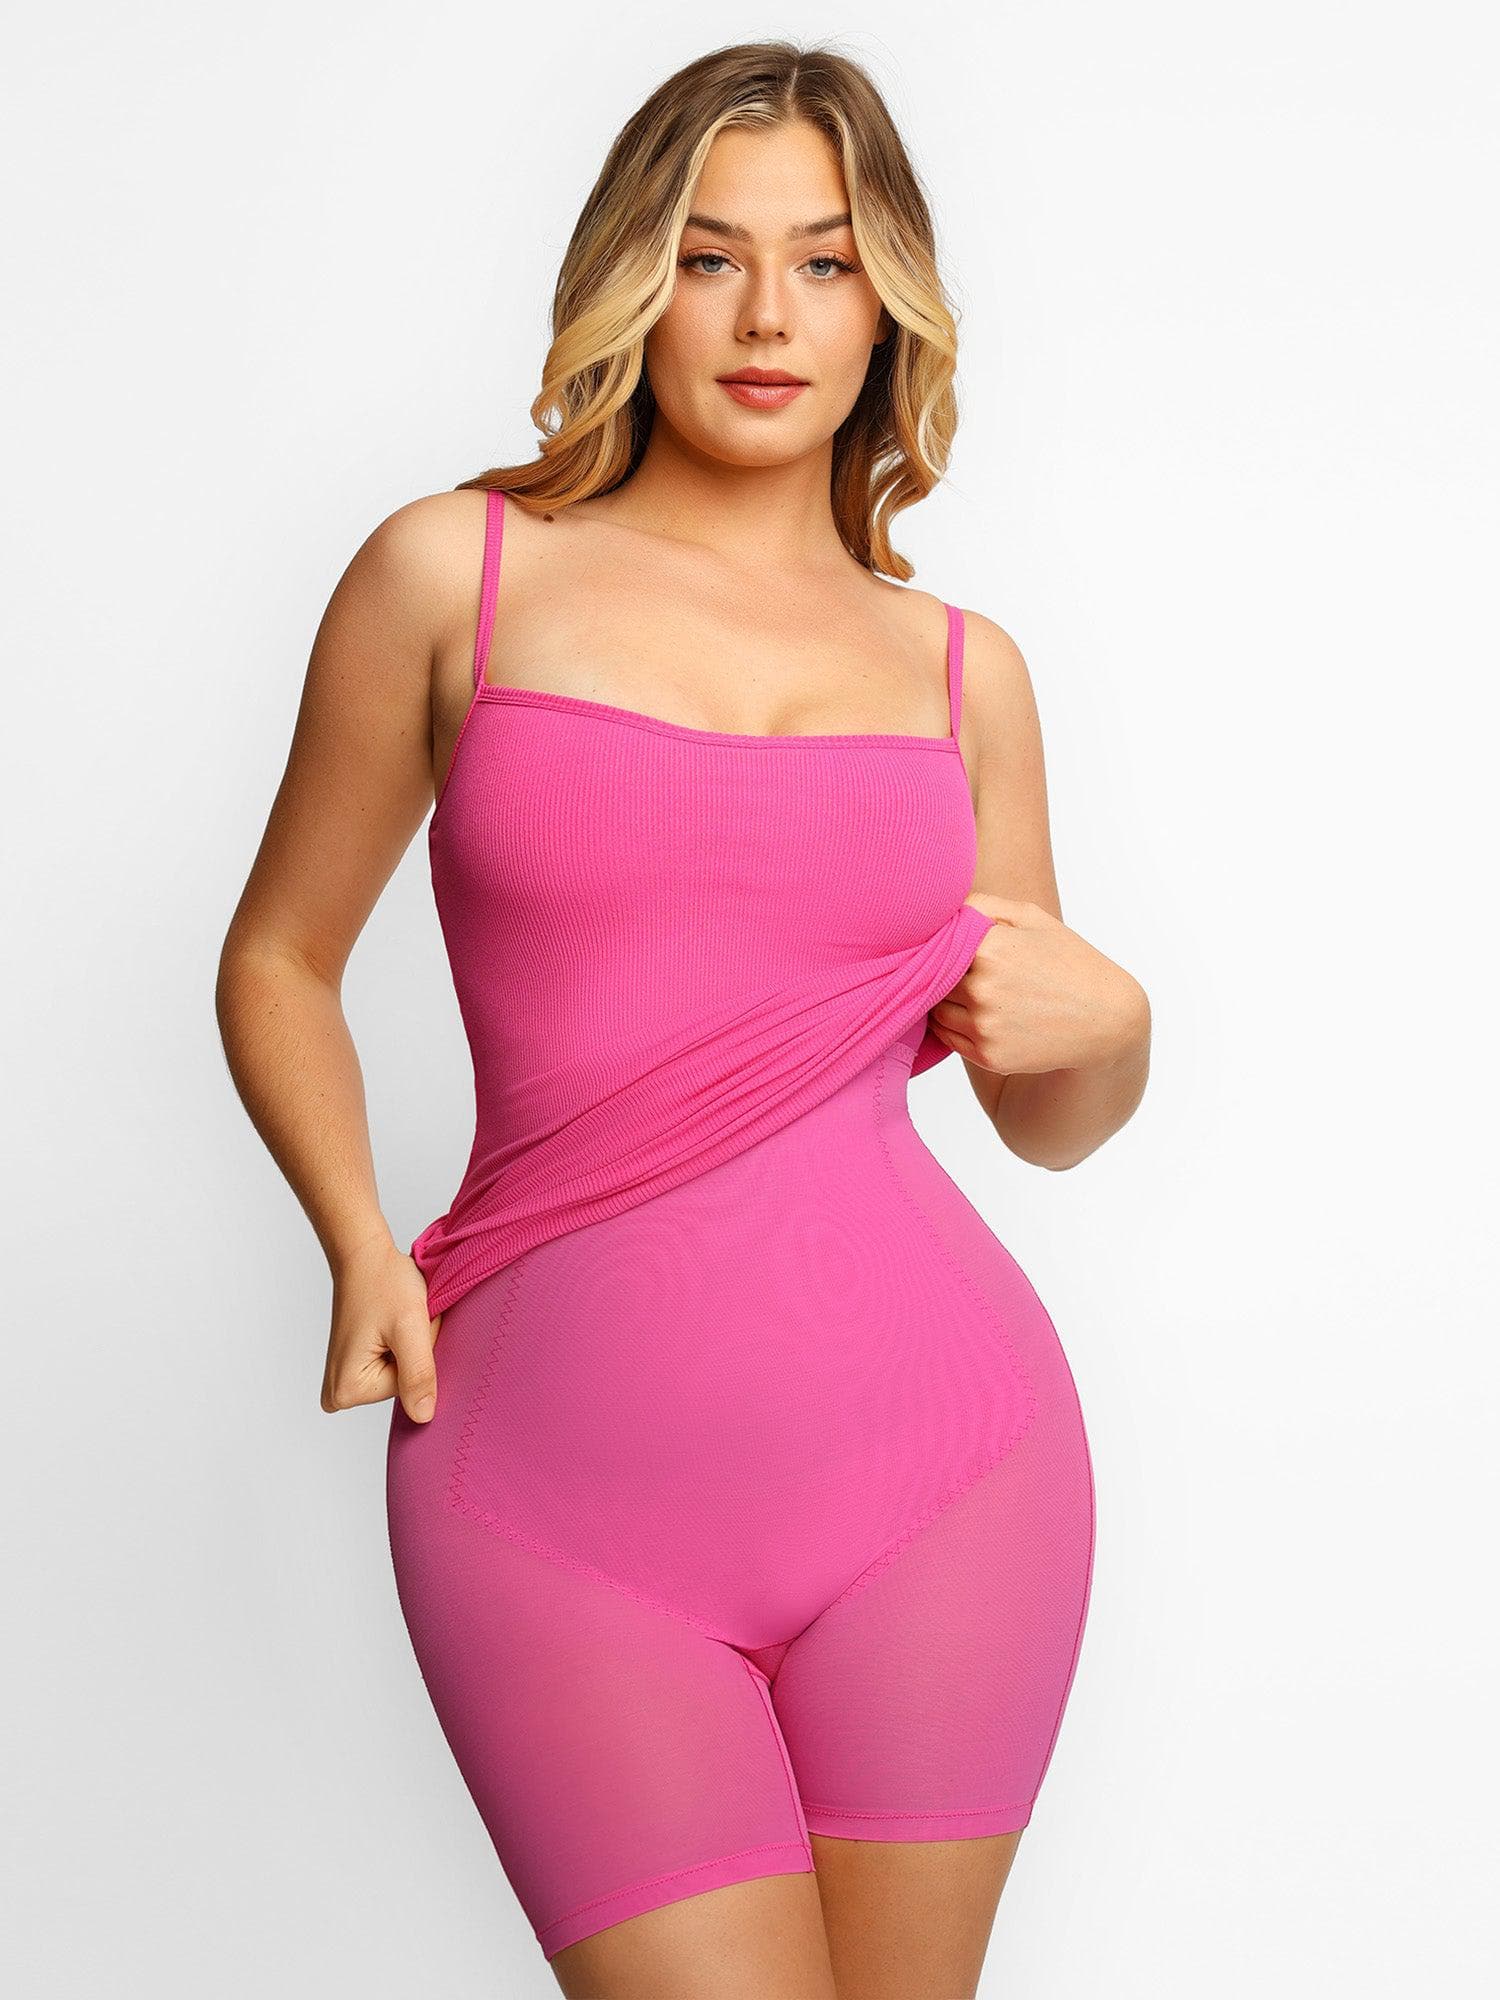  Kithol Browsluv Built-in Shapewear Lounge Dress, Dress Built in  Shapewear Bra, Shaper Dress Mini Slit Built in Shapewear : Clothing, Shoes  & Jewelry